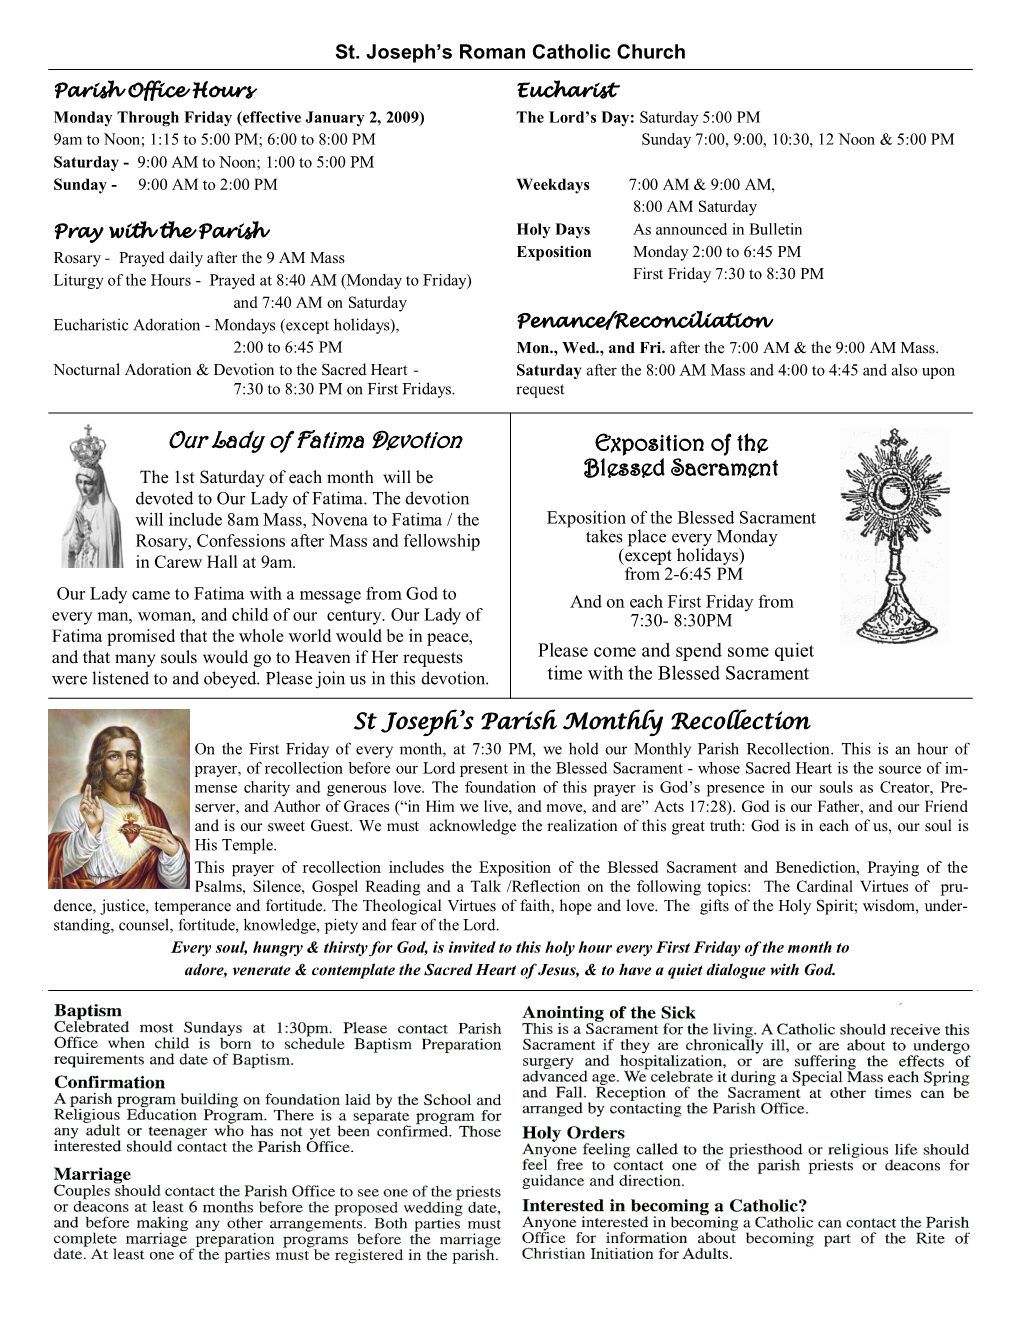 Our Lady of Fatima Devotion Exposition of The